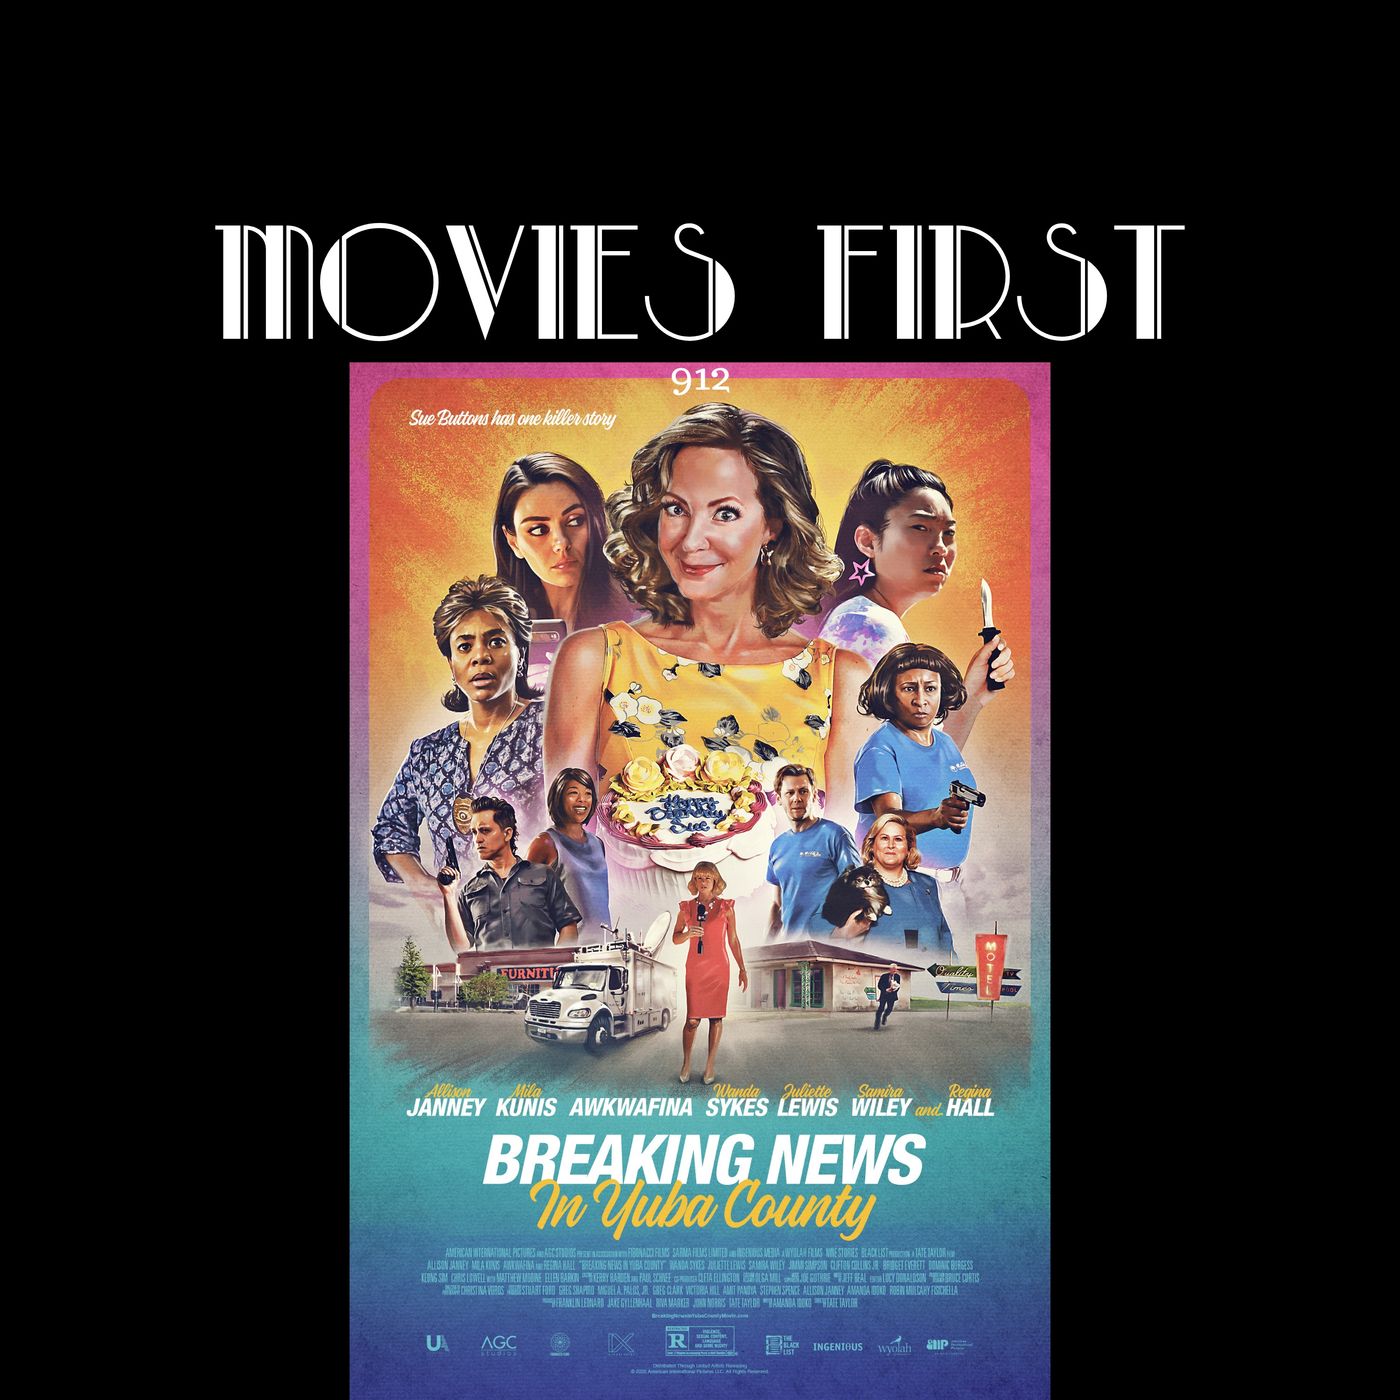 Breaking News in Yuba County (Comedy, Crime, Drama) (the @MoviesFirst review)